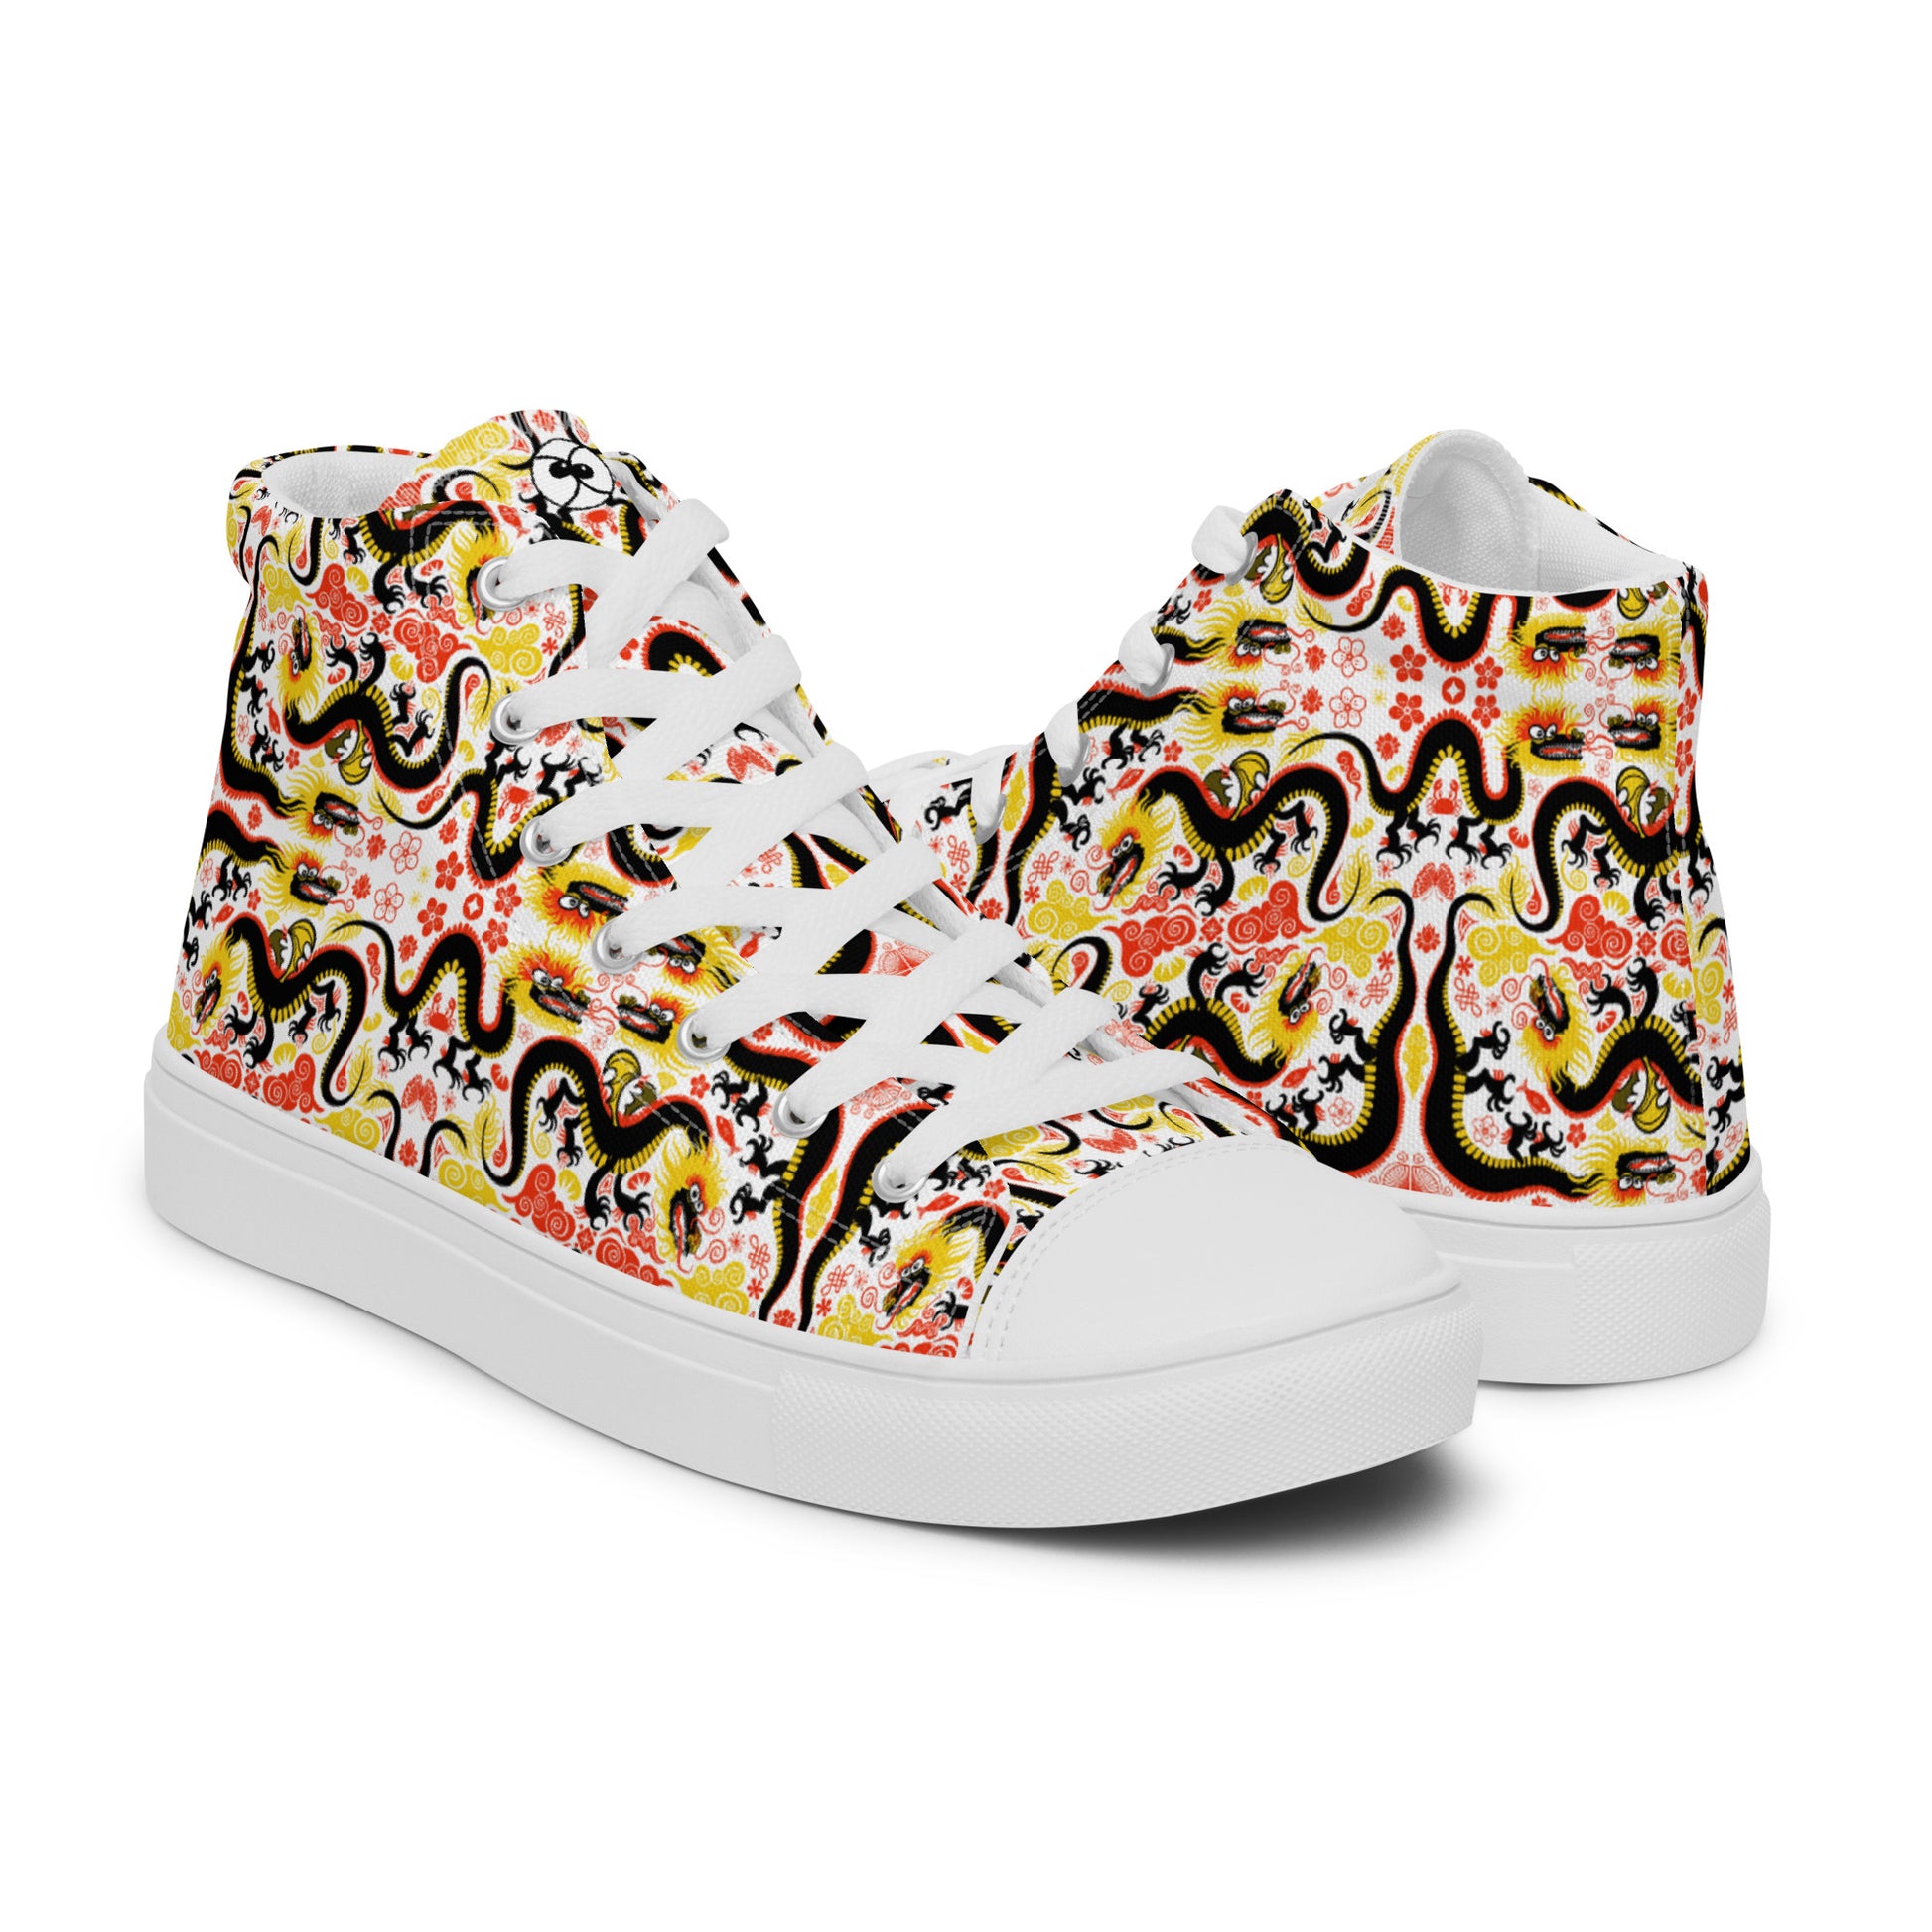 Legendary Chinese dragons pattern art Women’s high top canvas shoes. Overview